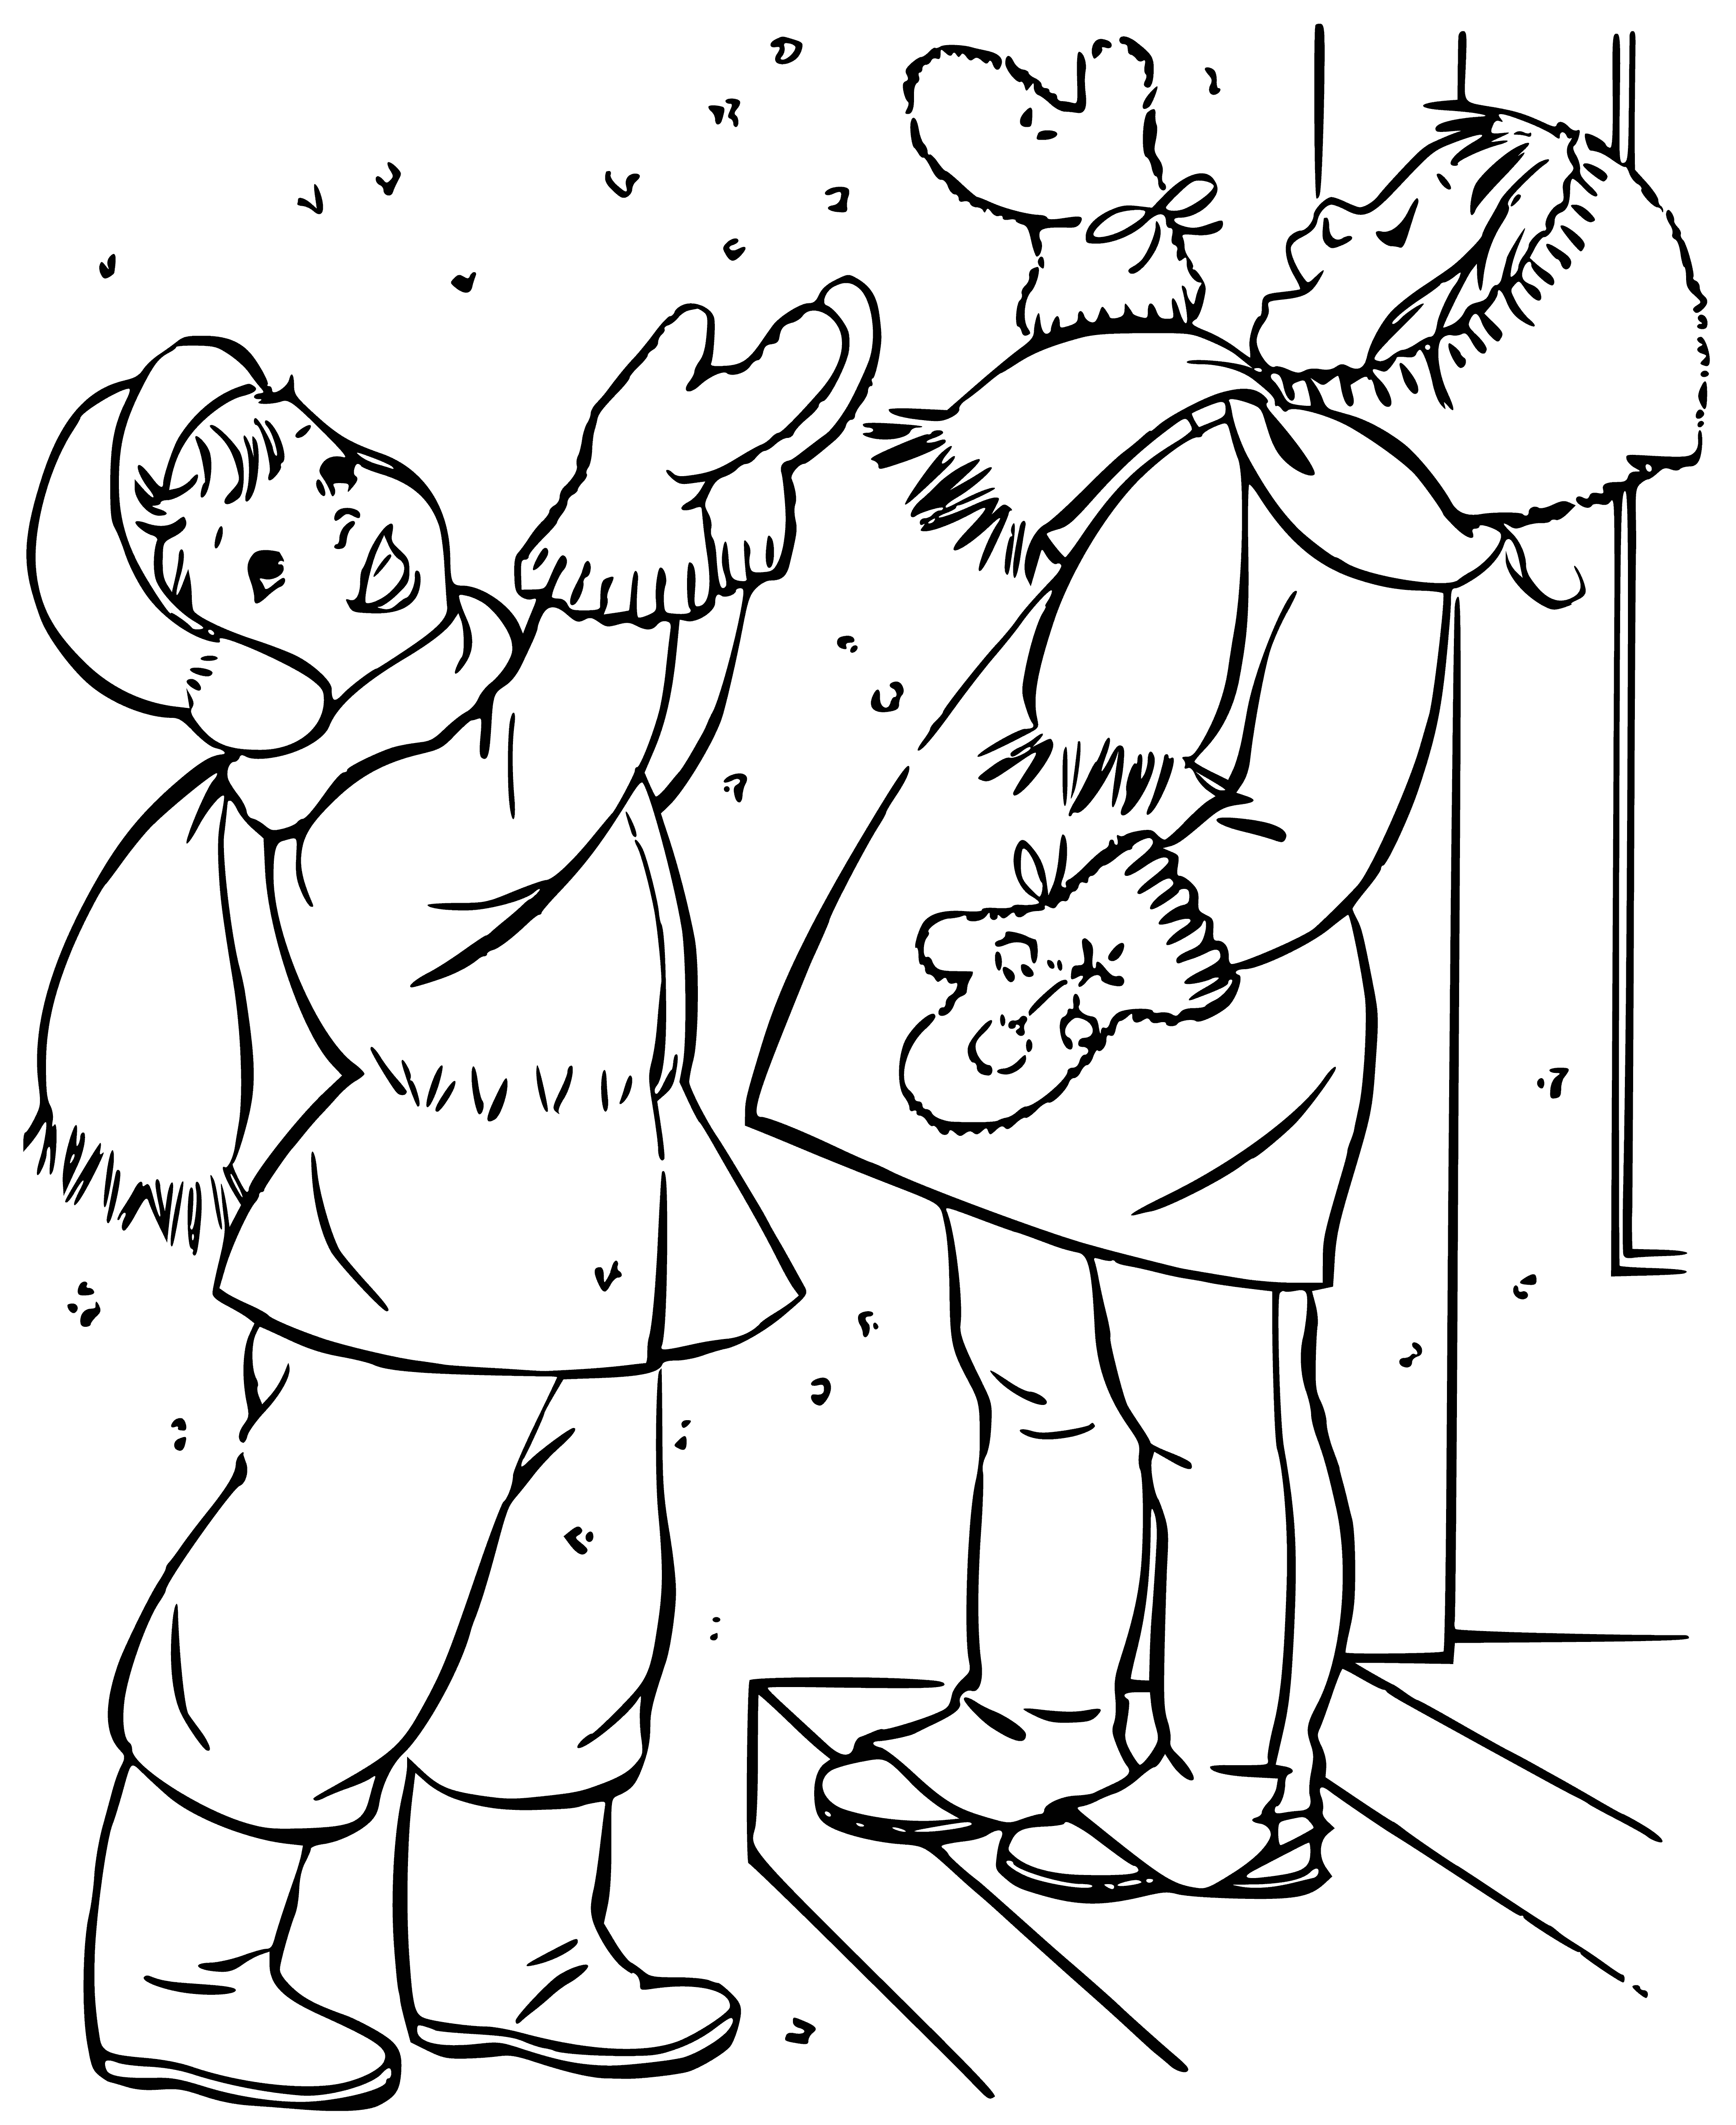 coloring page: Kids outside catching snowflakes, bundled up or just wearing mittens, happy & having fun!